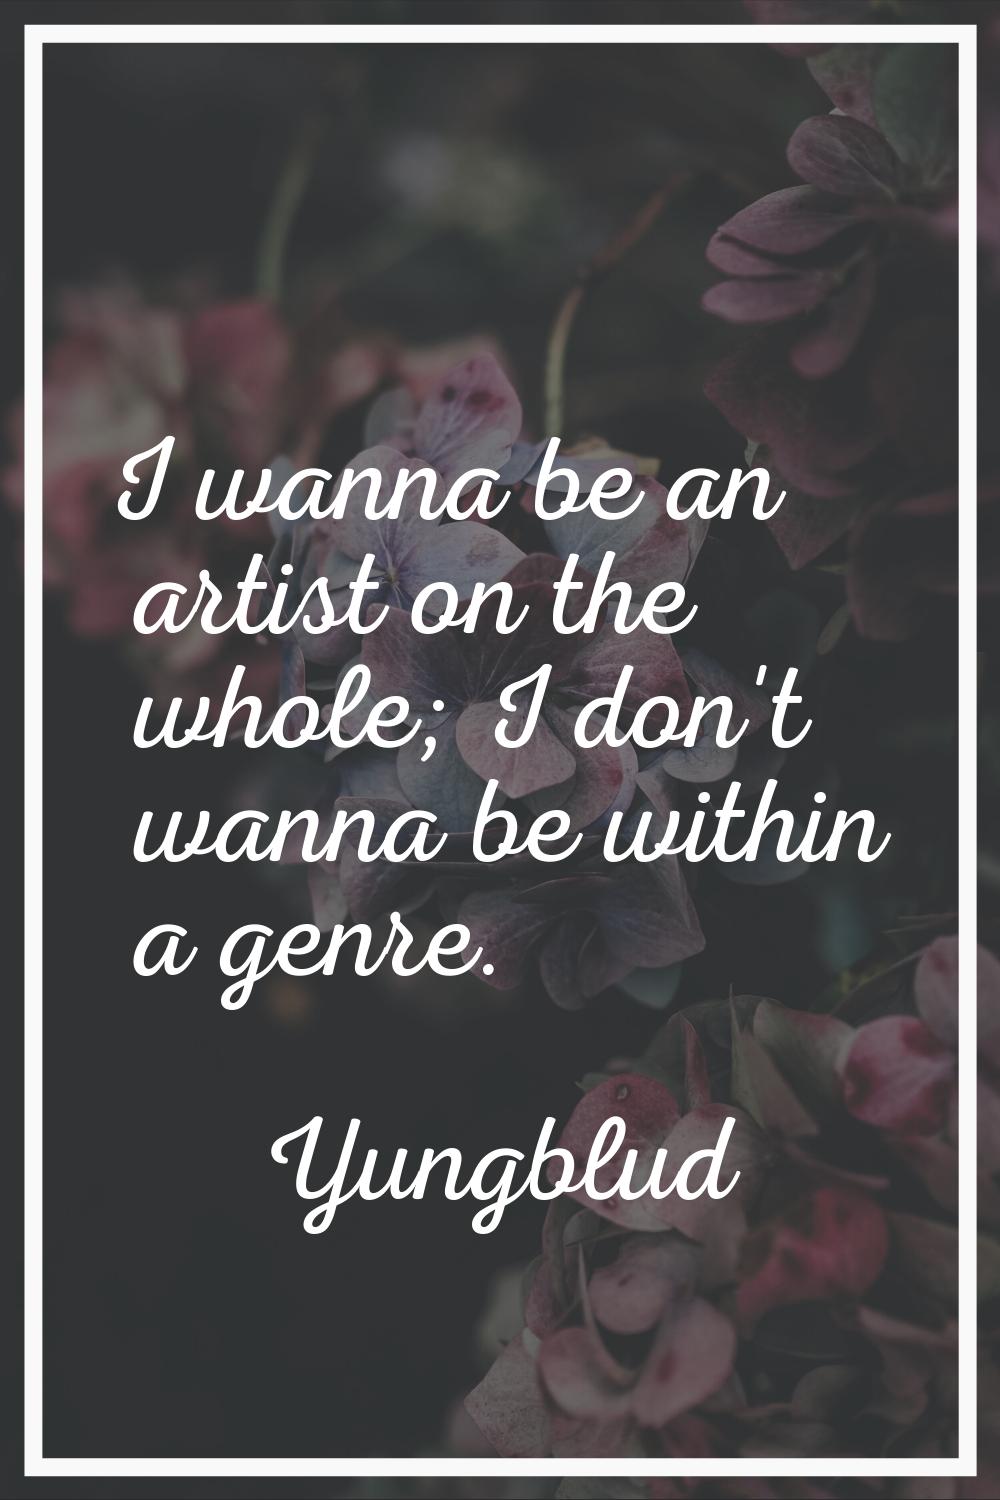 I wanna be an artist on the whole; I don't wanna be within a genre.